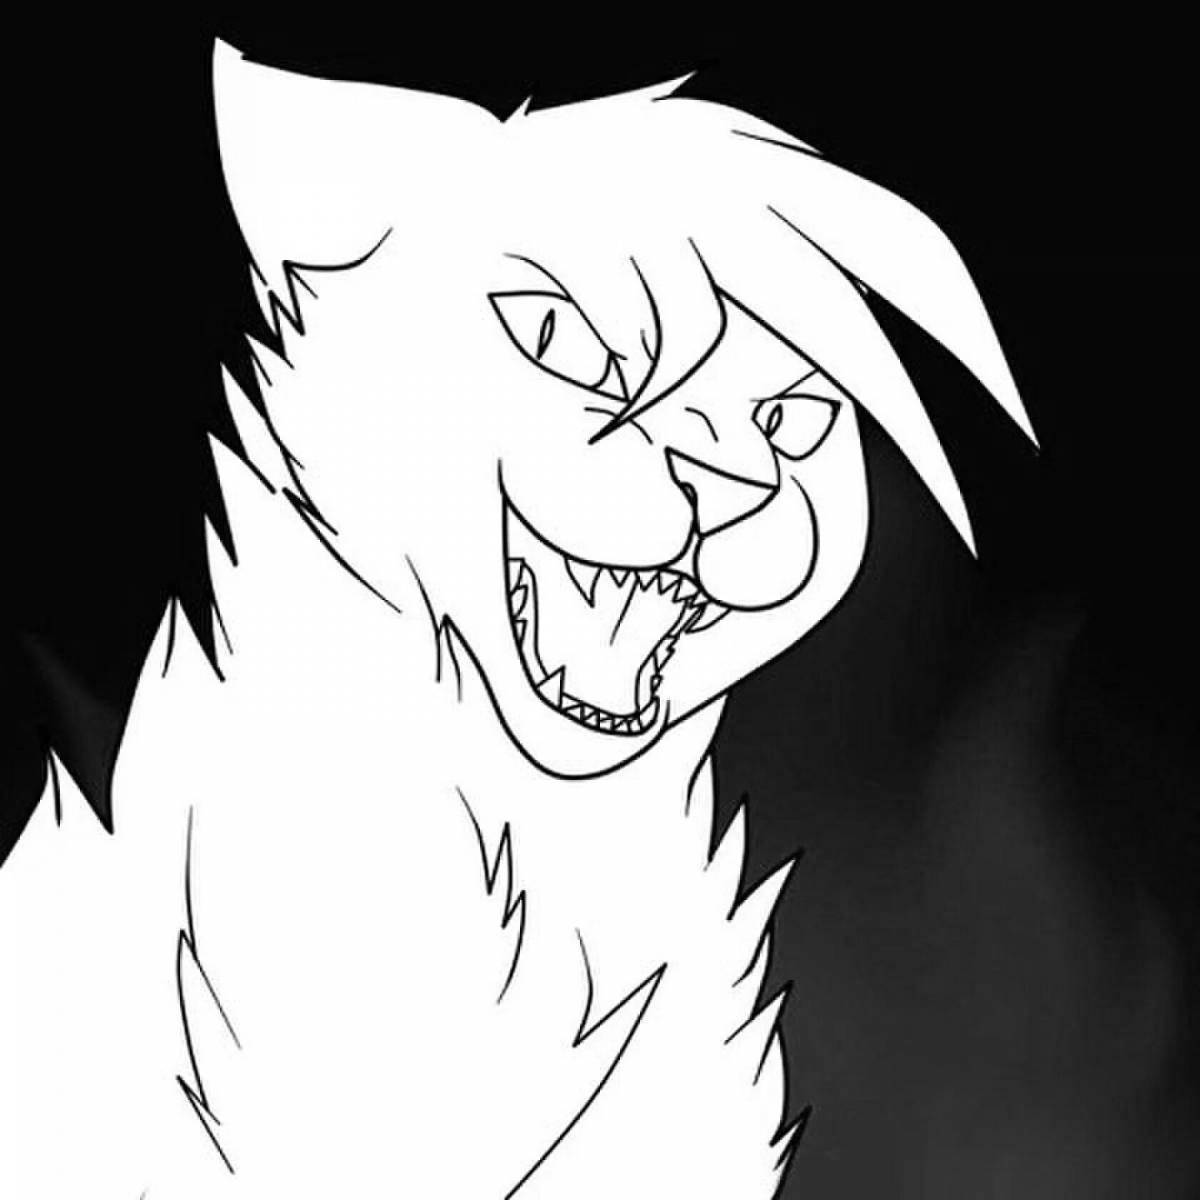 Exquisite warrior cats scourge coloring page